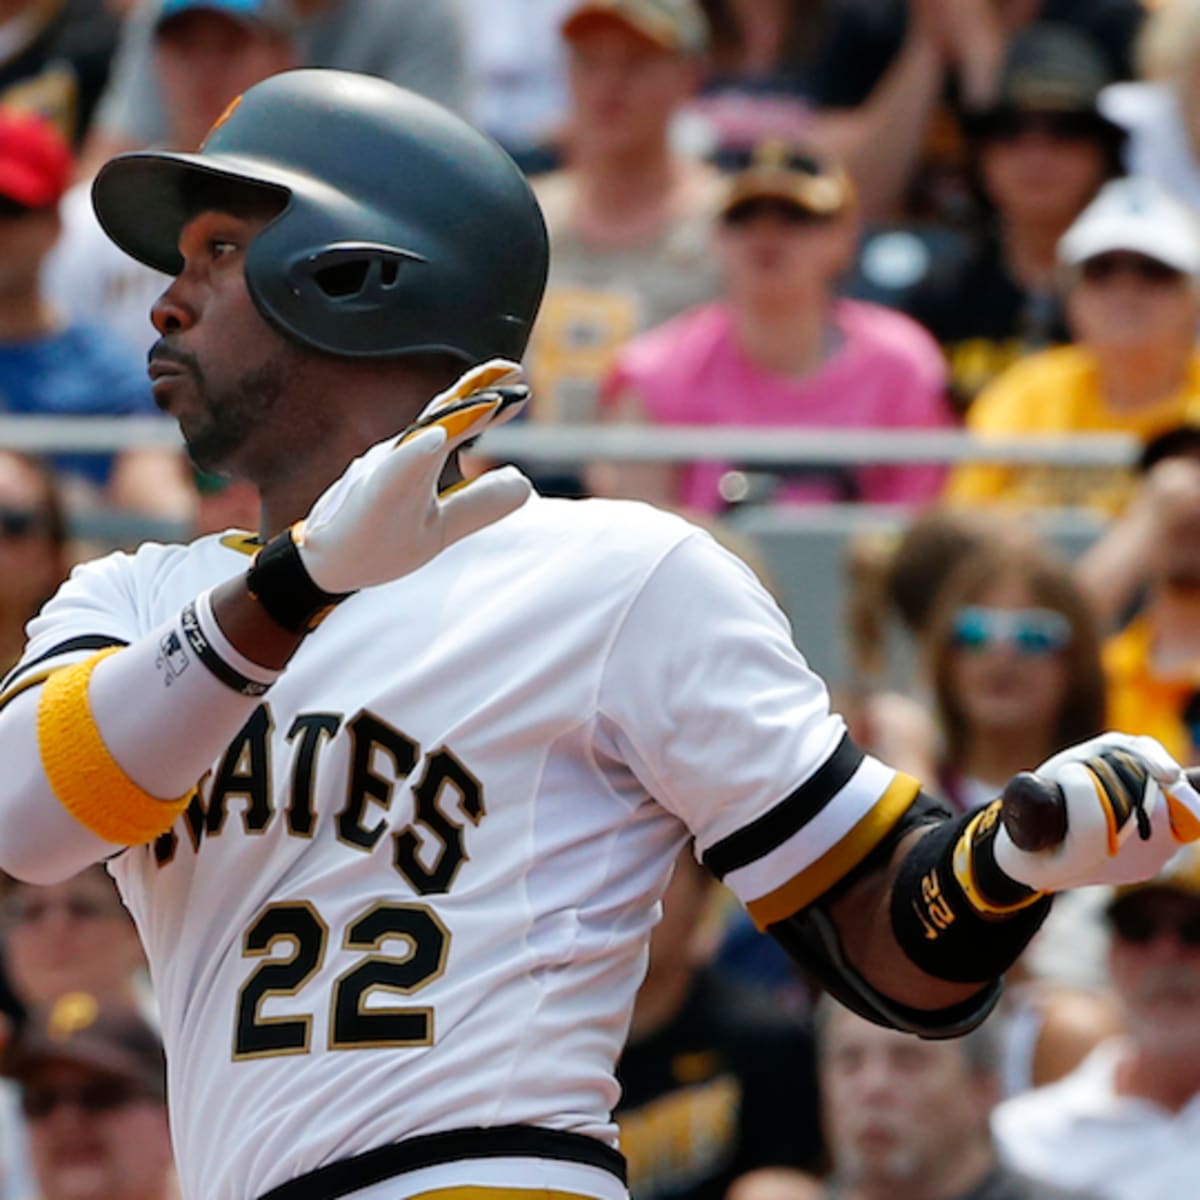 At almost 36 years old, Andrew McCutchen remains a physical marvel